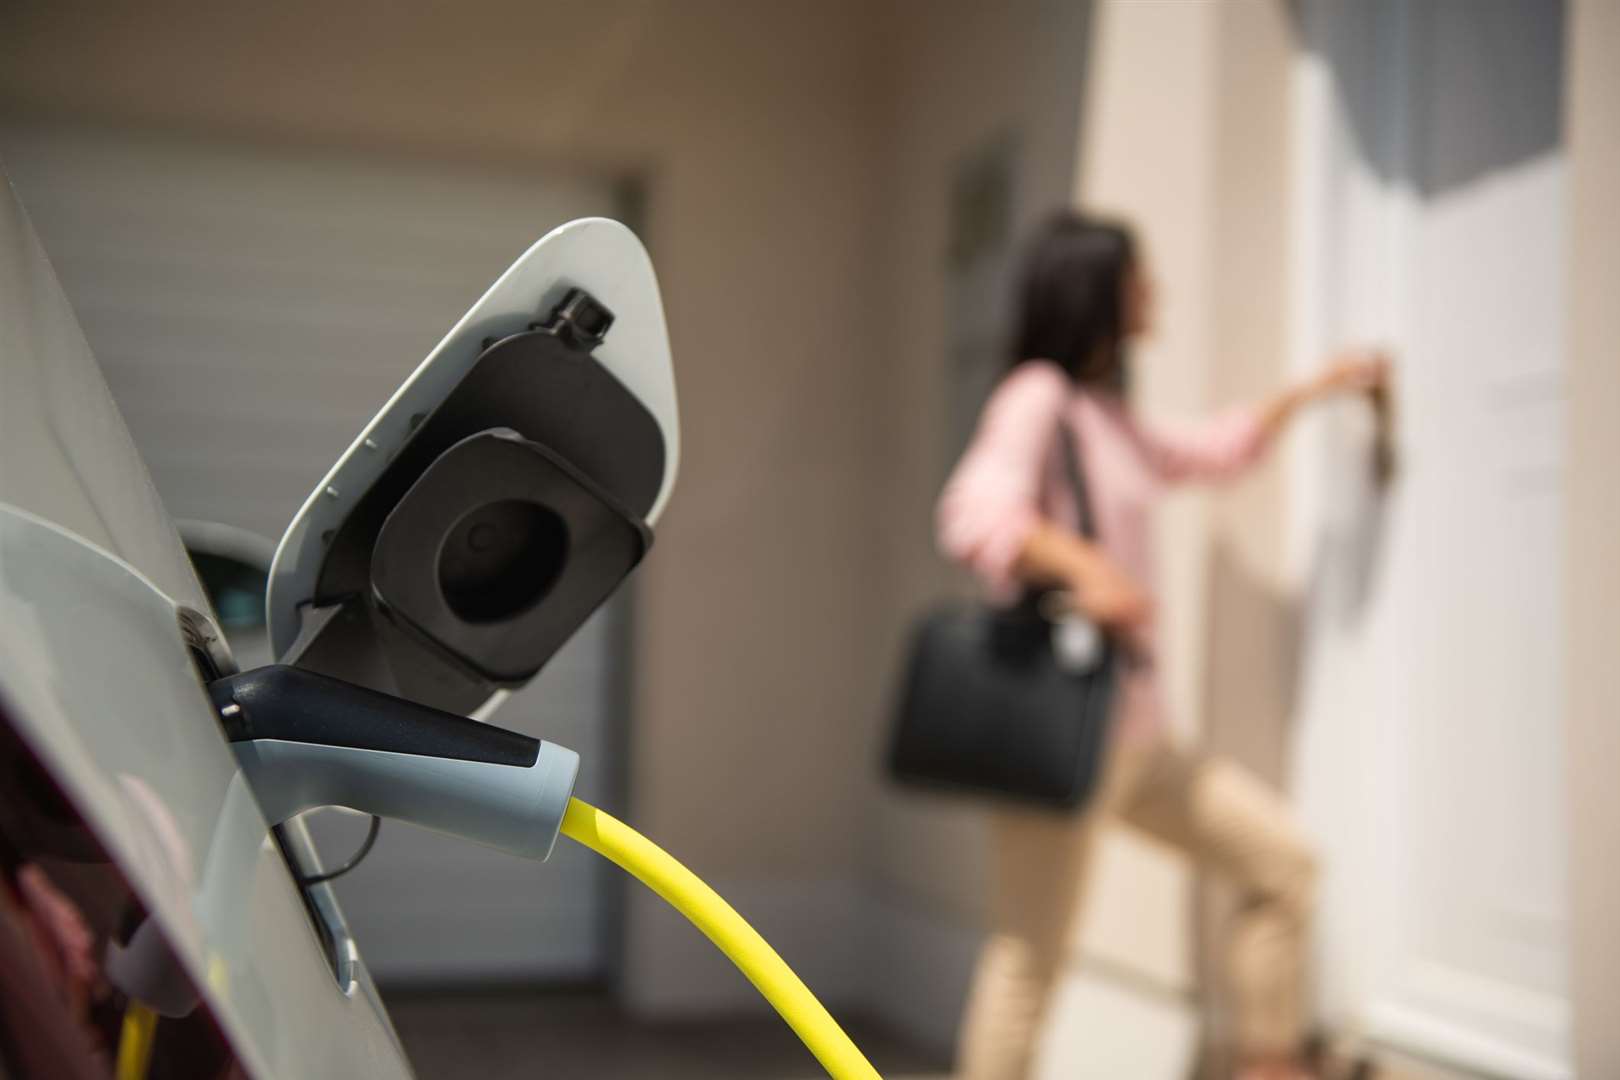 New homes, shops and workplaces will have to install electric car charging points from next year, says the government. Image: iStock